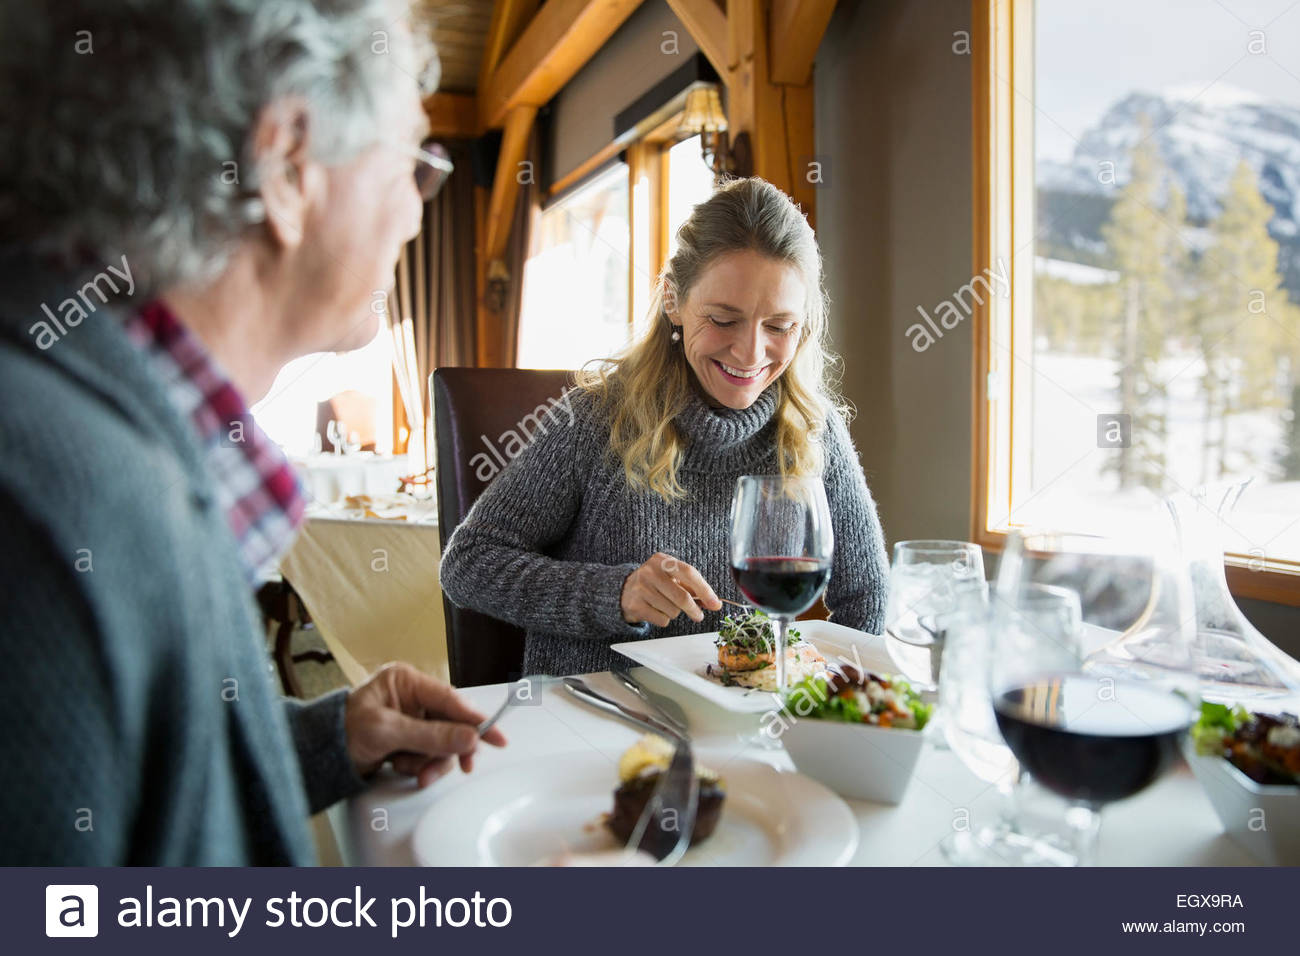 Couple eating at restaurant table Stock Photo